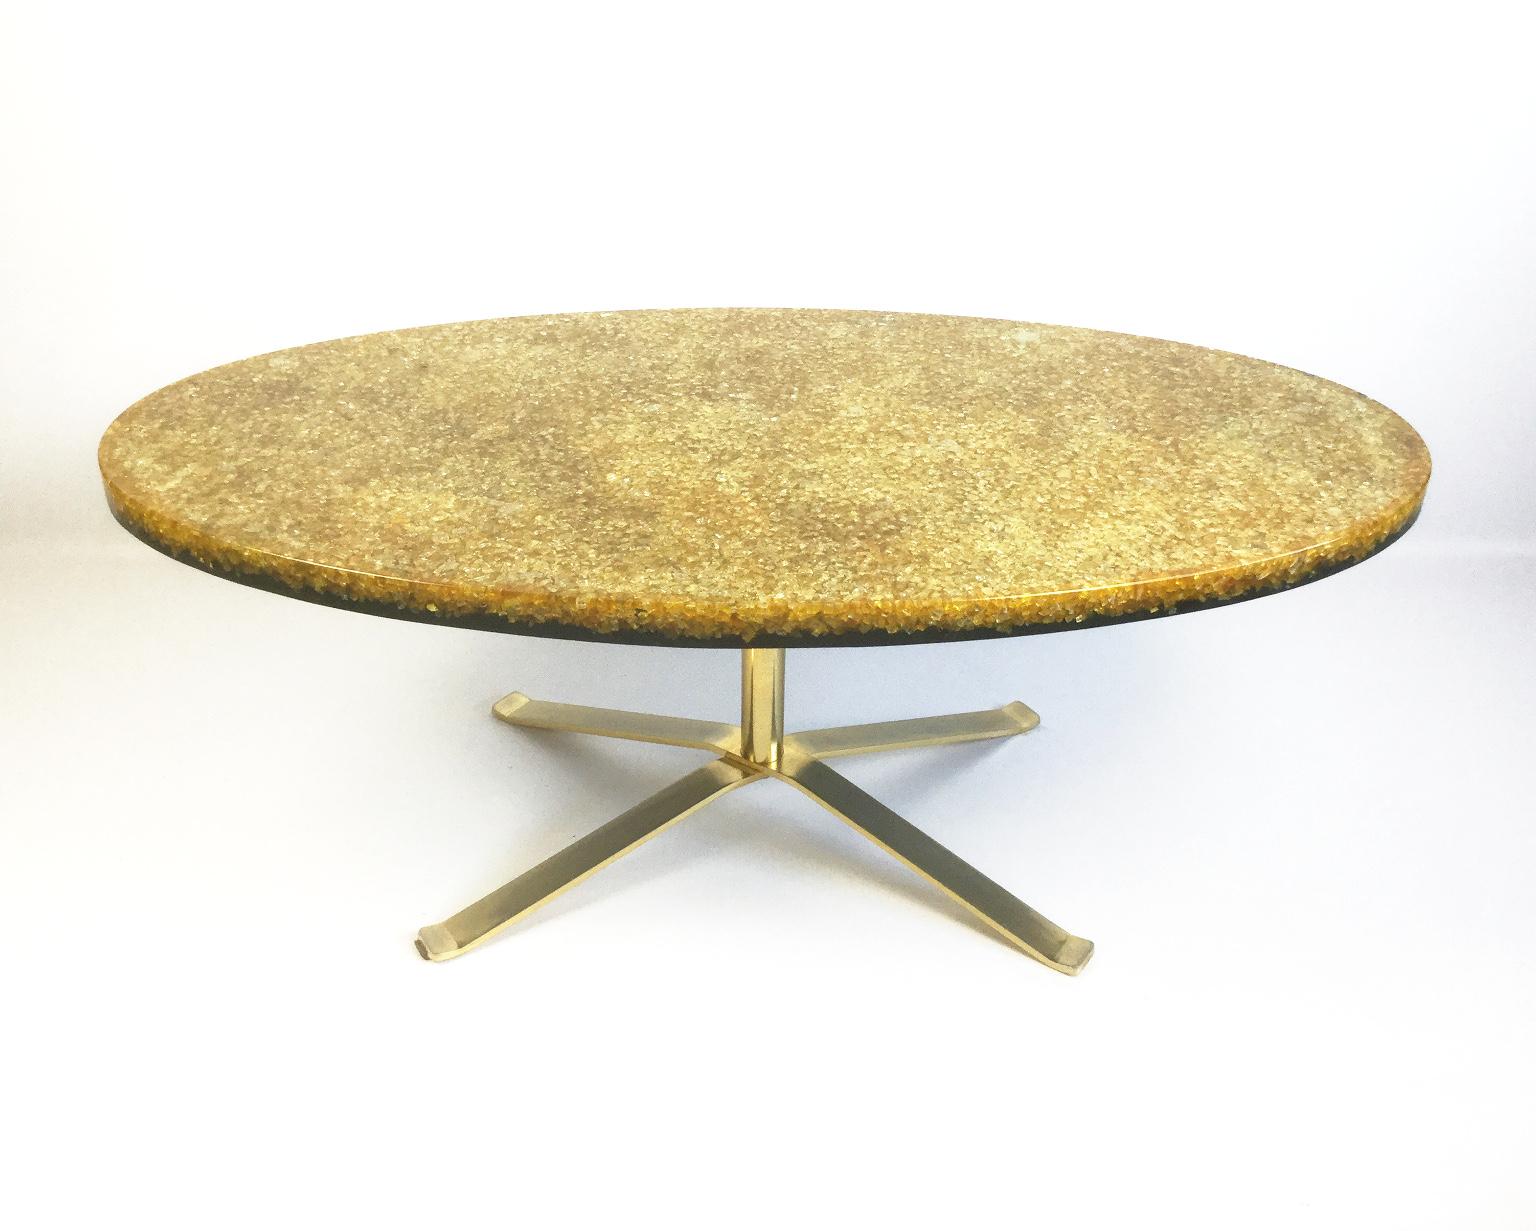 Late 20th Century French Resin and Glass Gold Coffee Table by Pierre Giraudon, 1970s